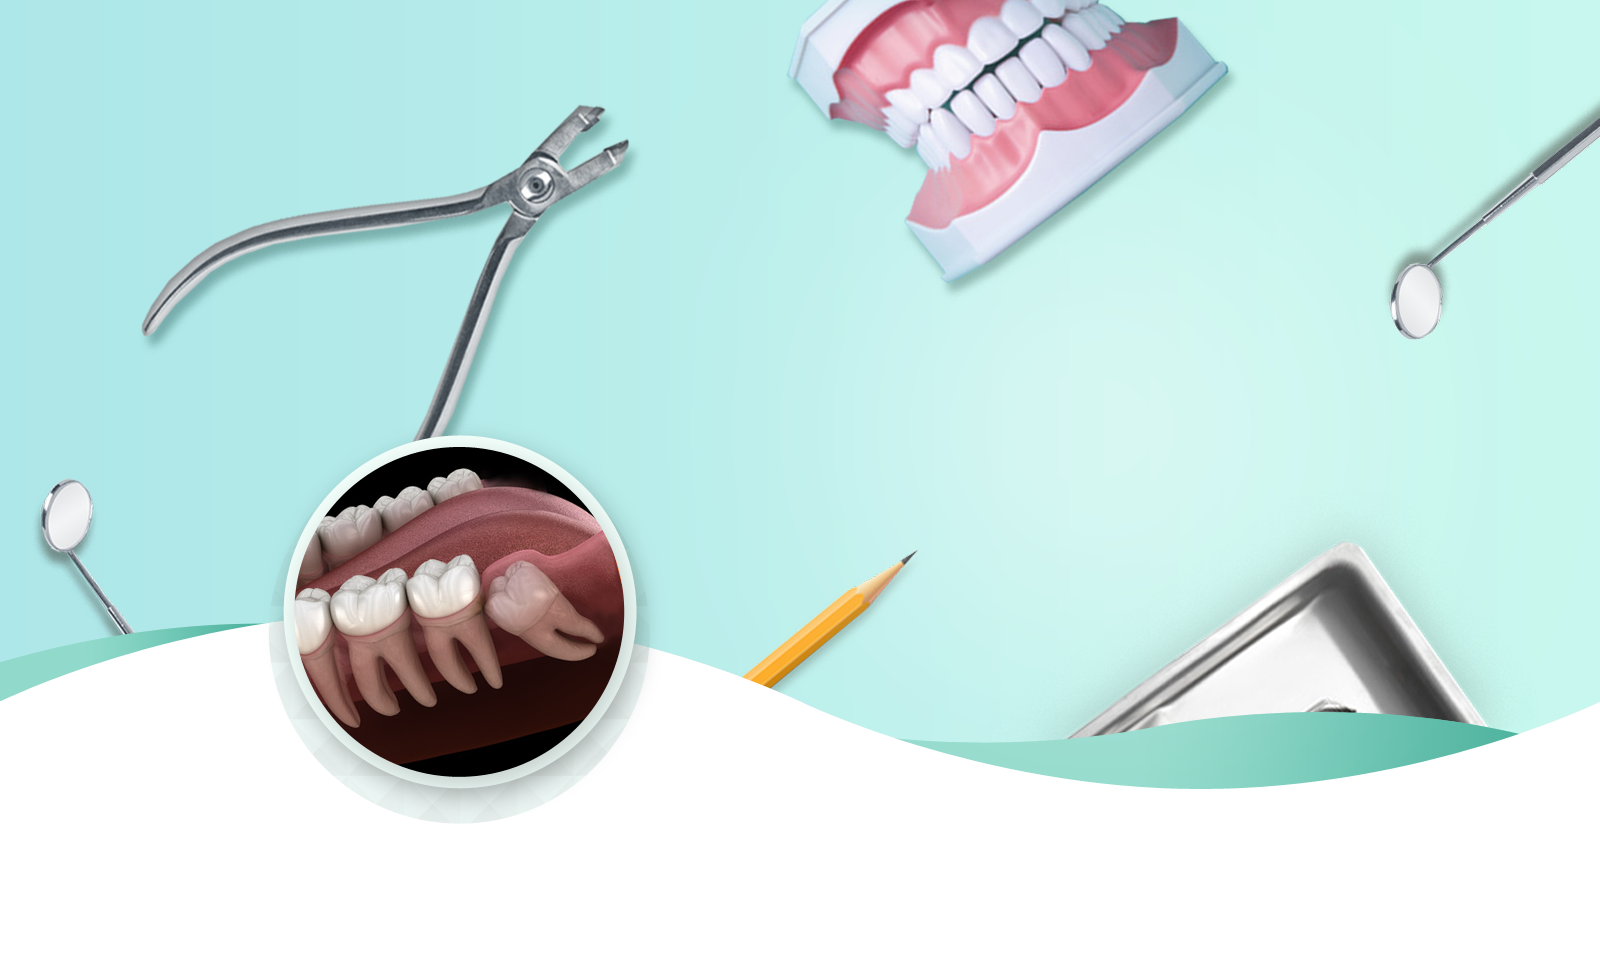 Wisdom tooth extractions